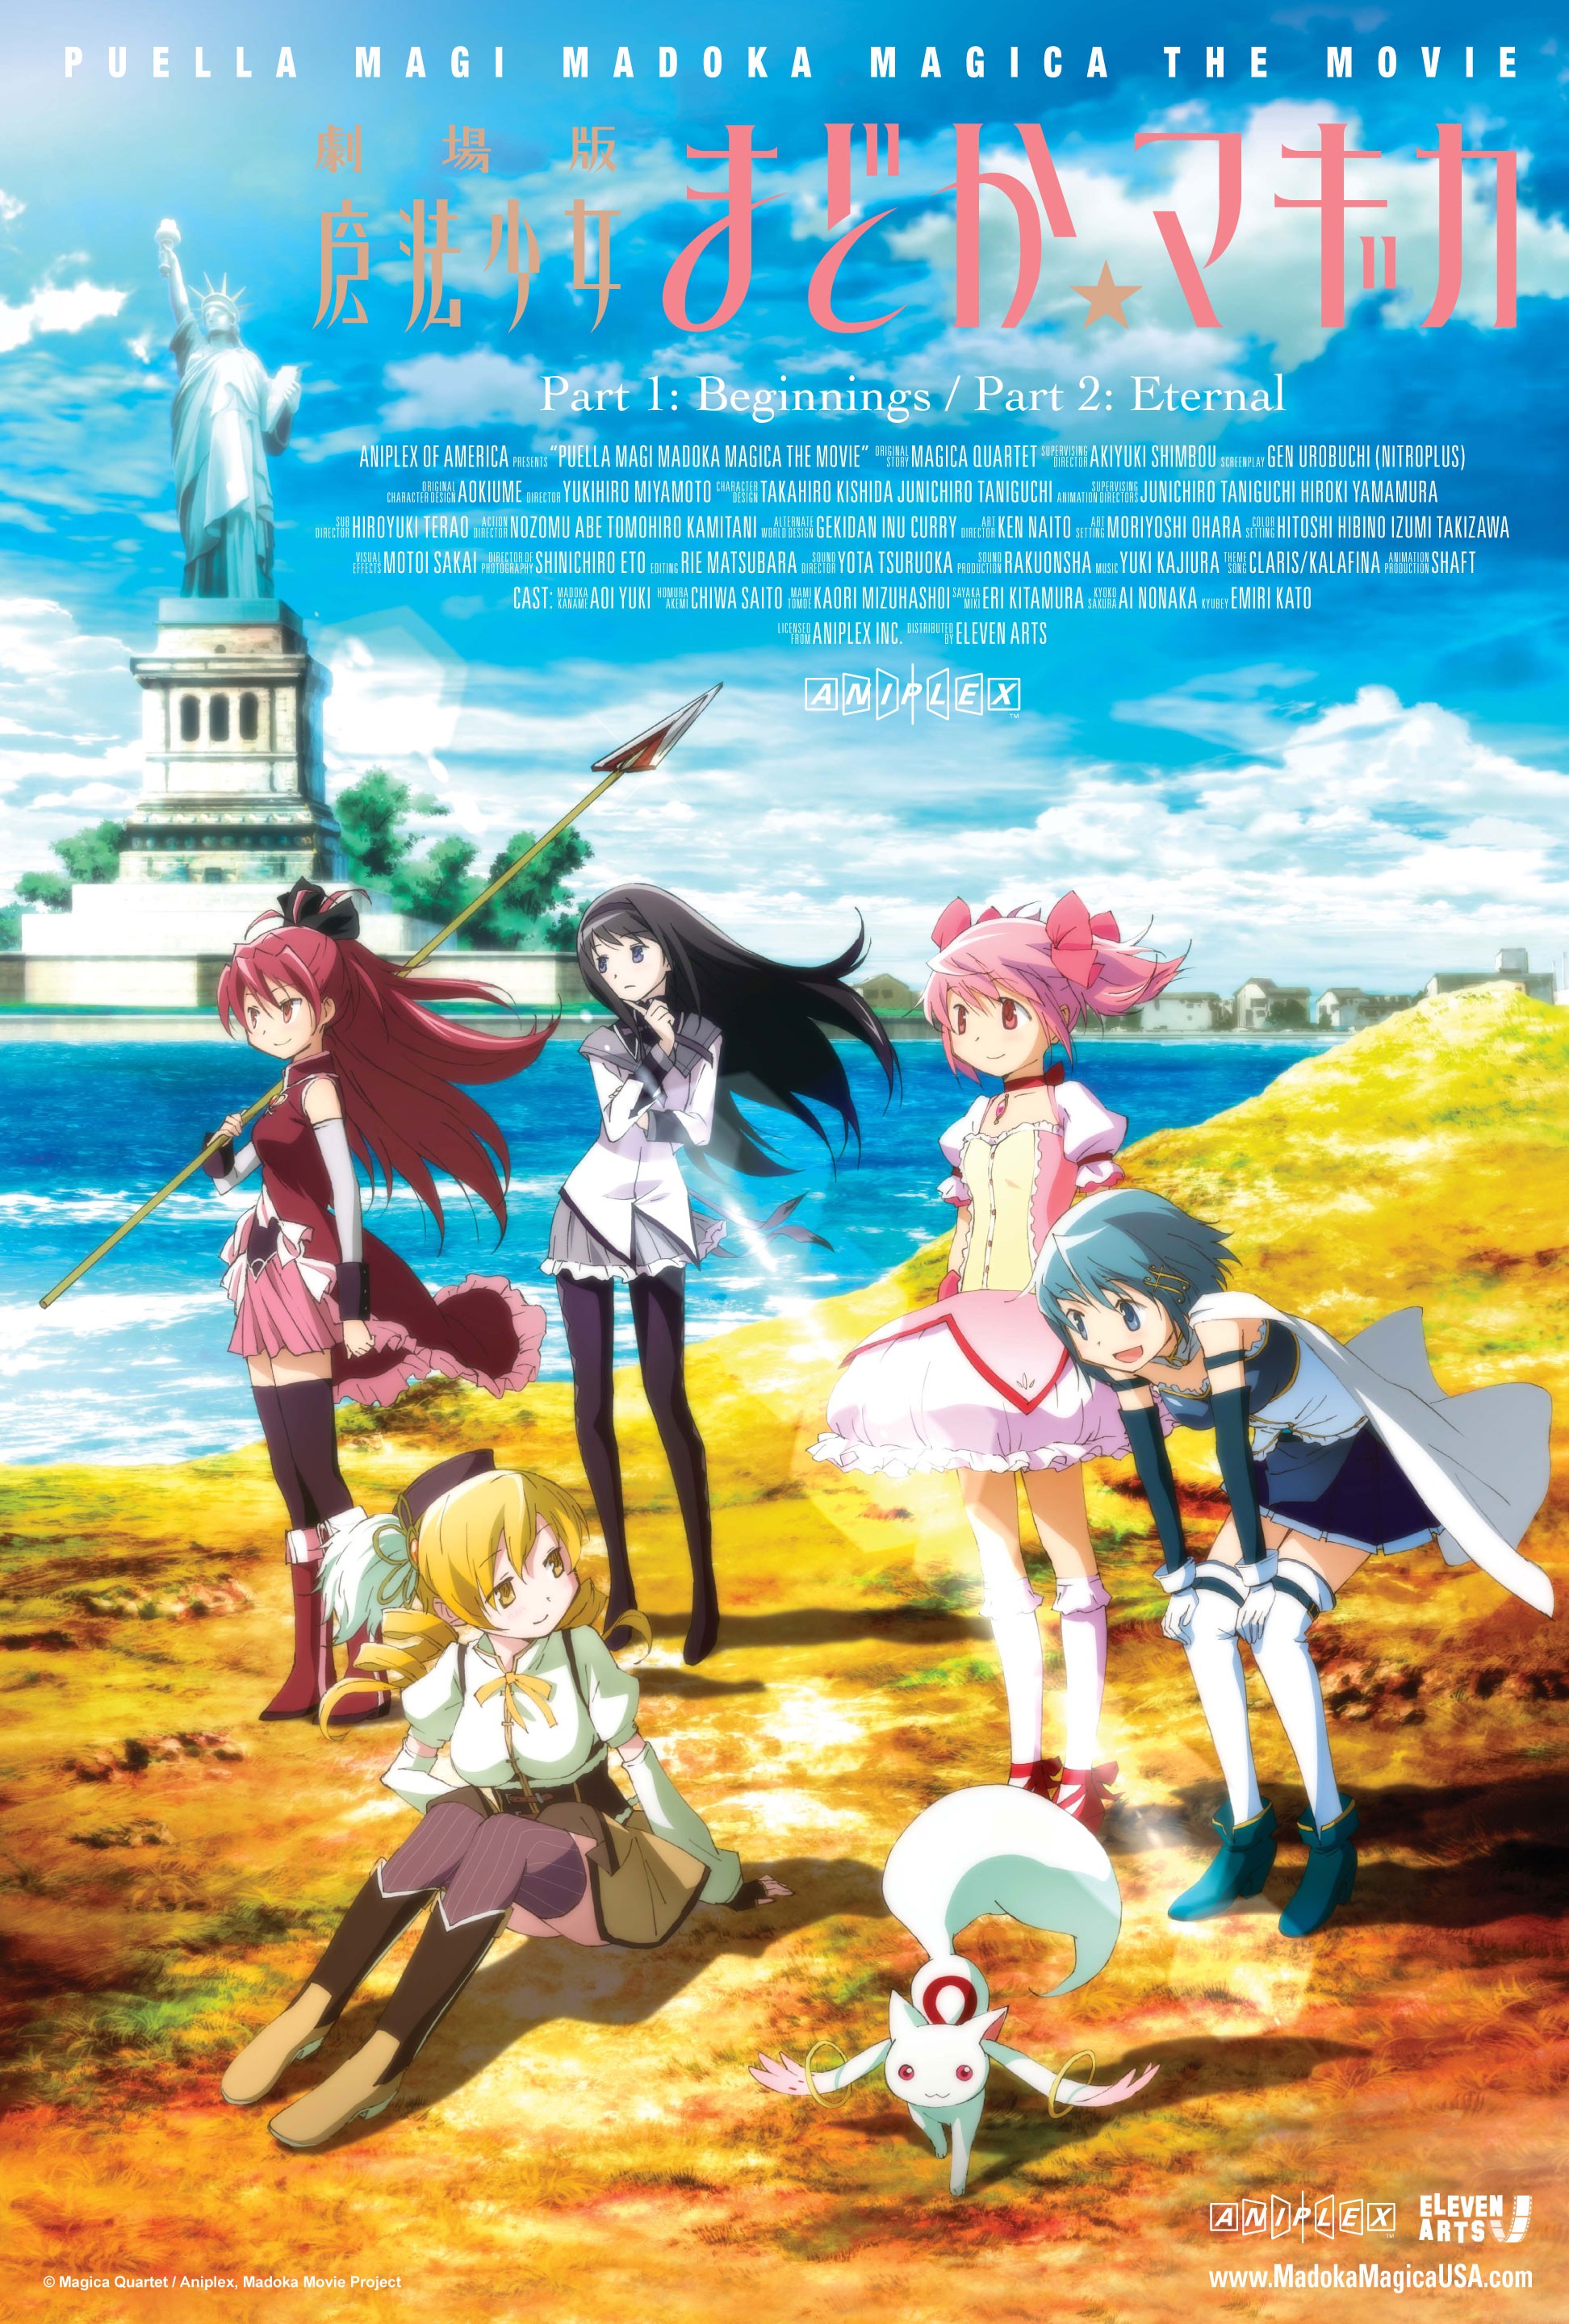 Mega Sized Movie Poster Image for Puella Magi Madoka Magica the Movie Part I: The Beginning Story (#2 of 3)